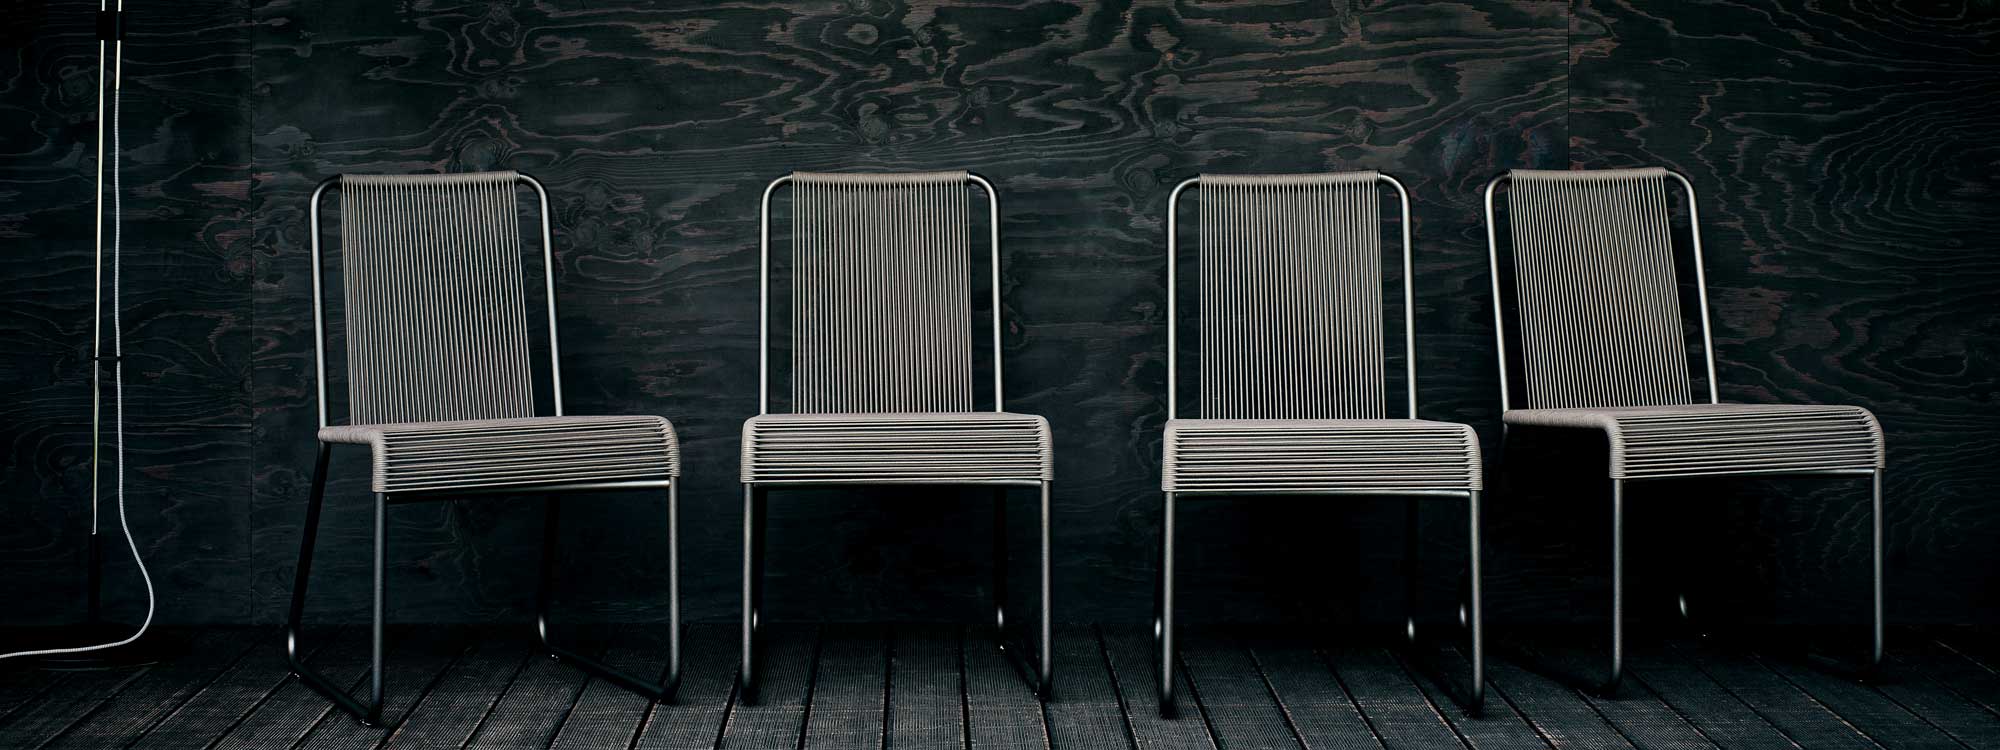 Image of 4 Harp black garden chairs with sand-colored rope seat and back by RODA, shown against black wooden wall